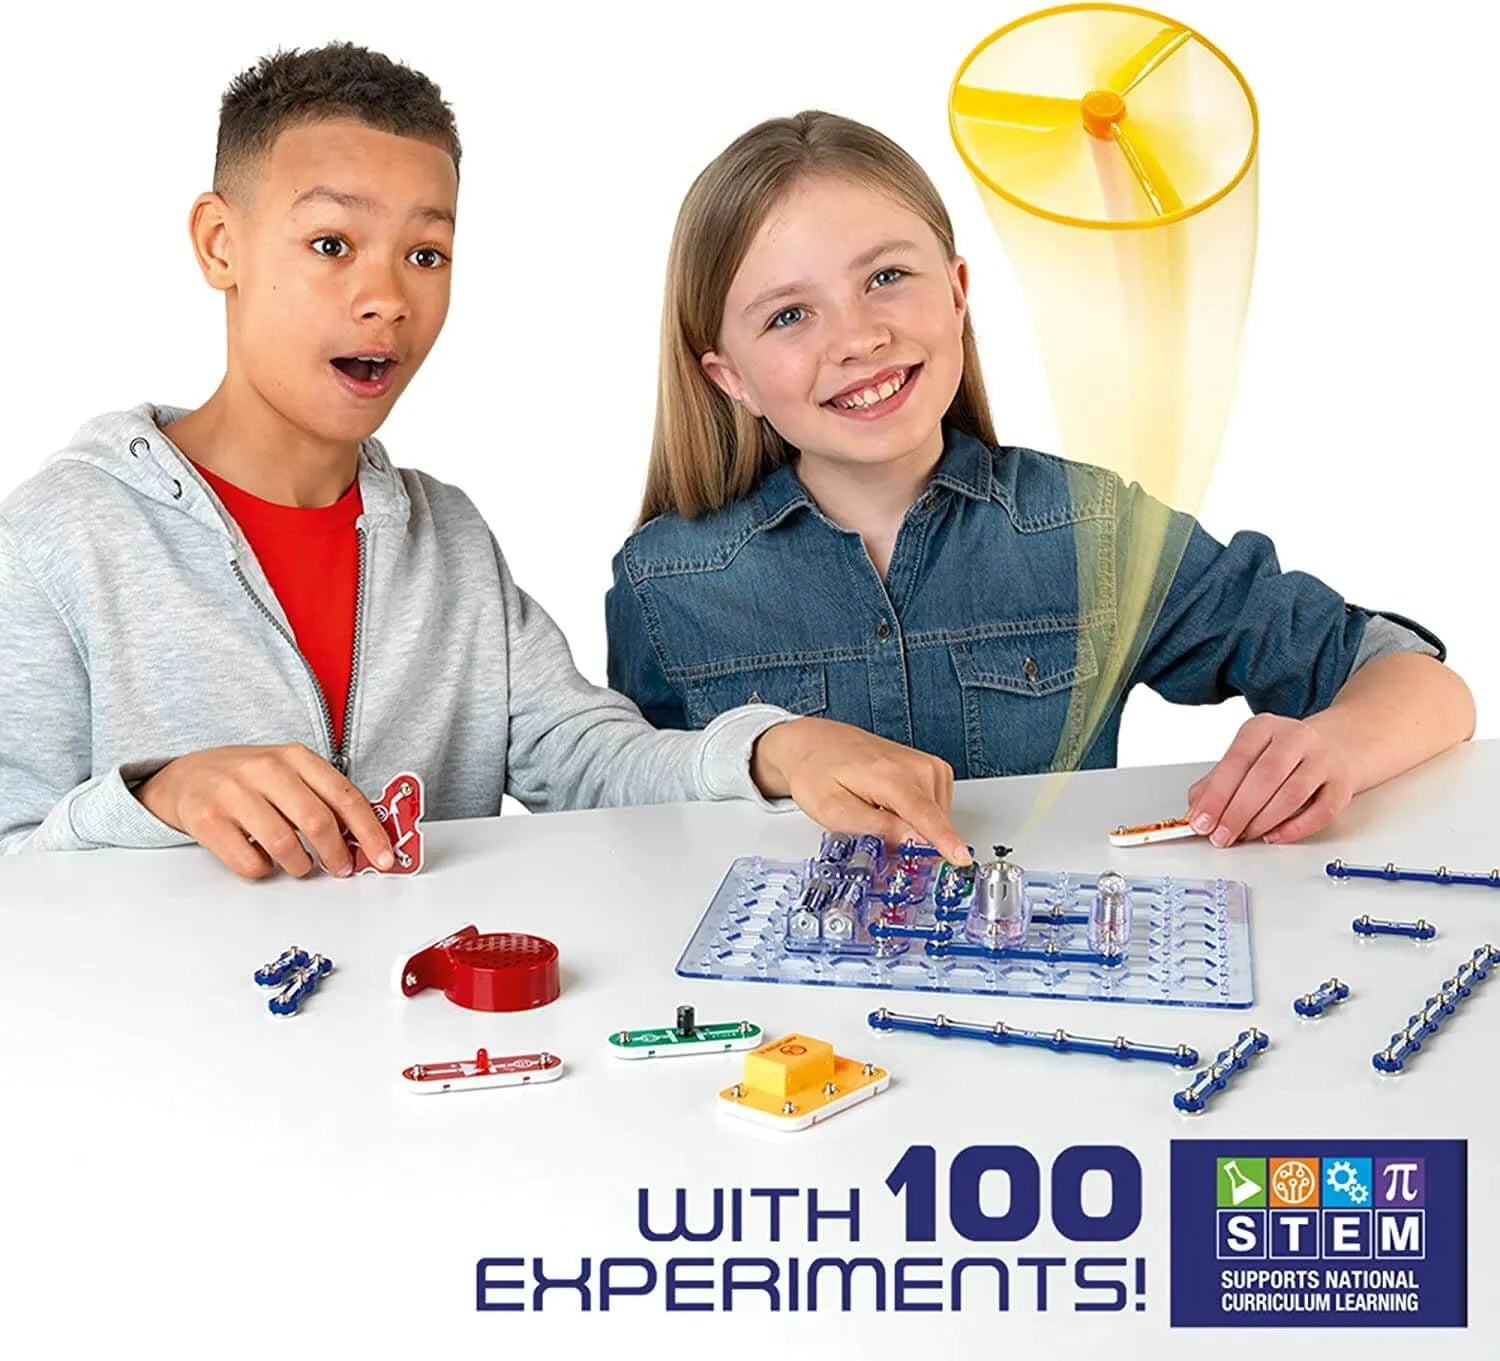 Lifestyle image of Hot Wires - Stem toys for children - John Adams